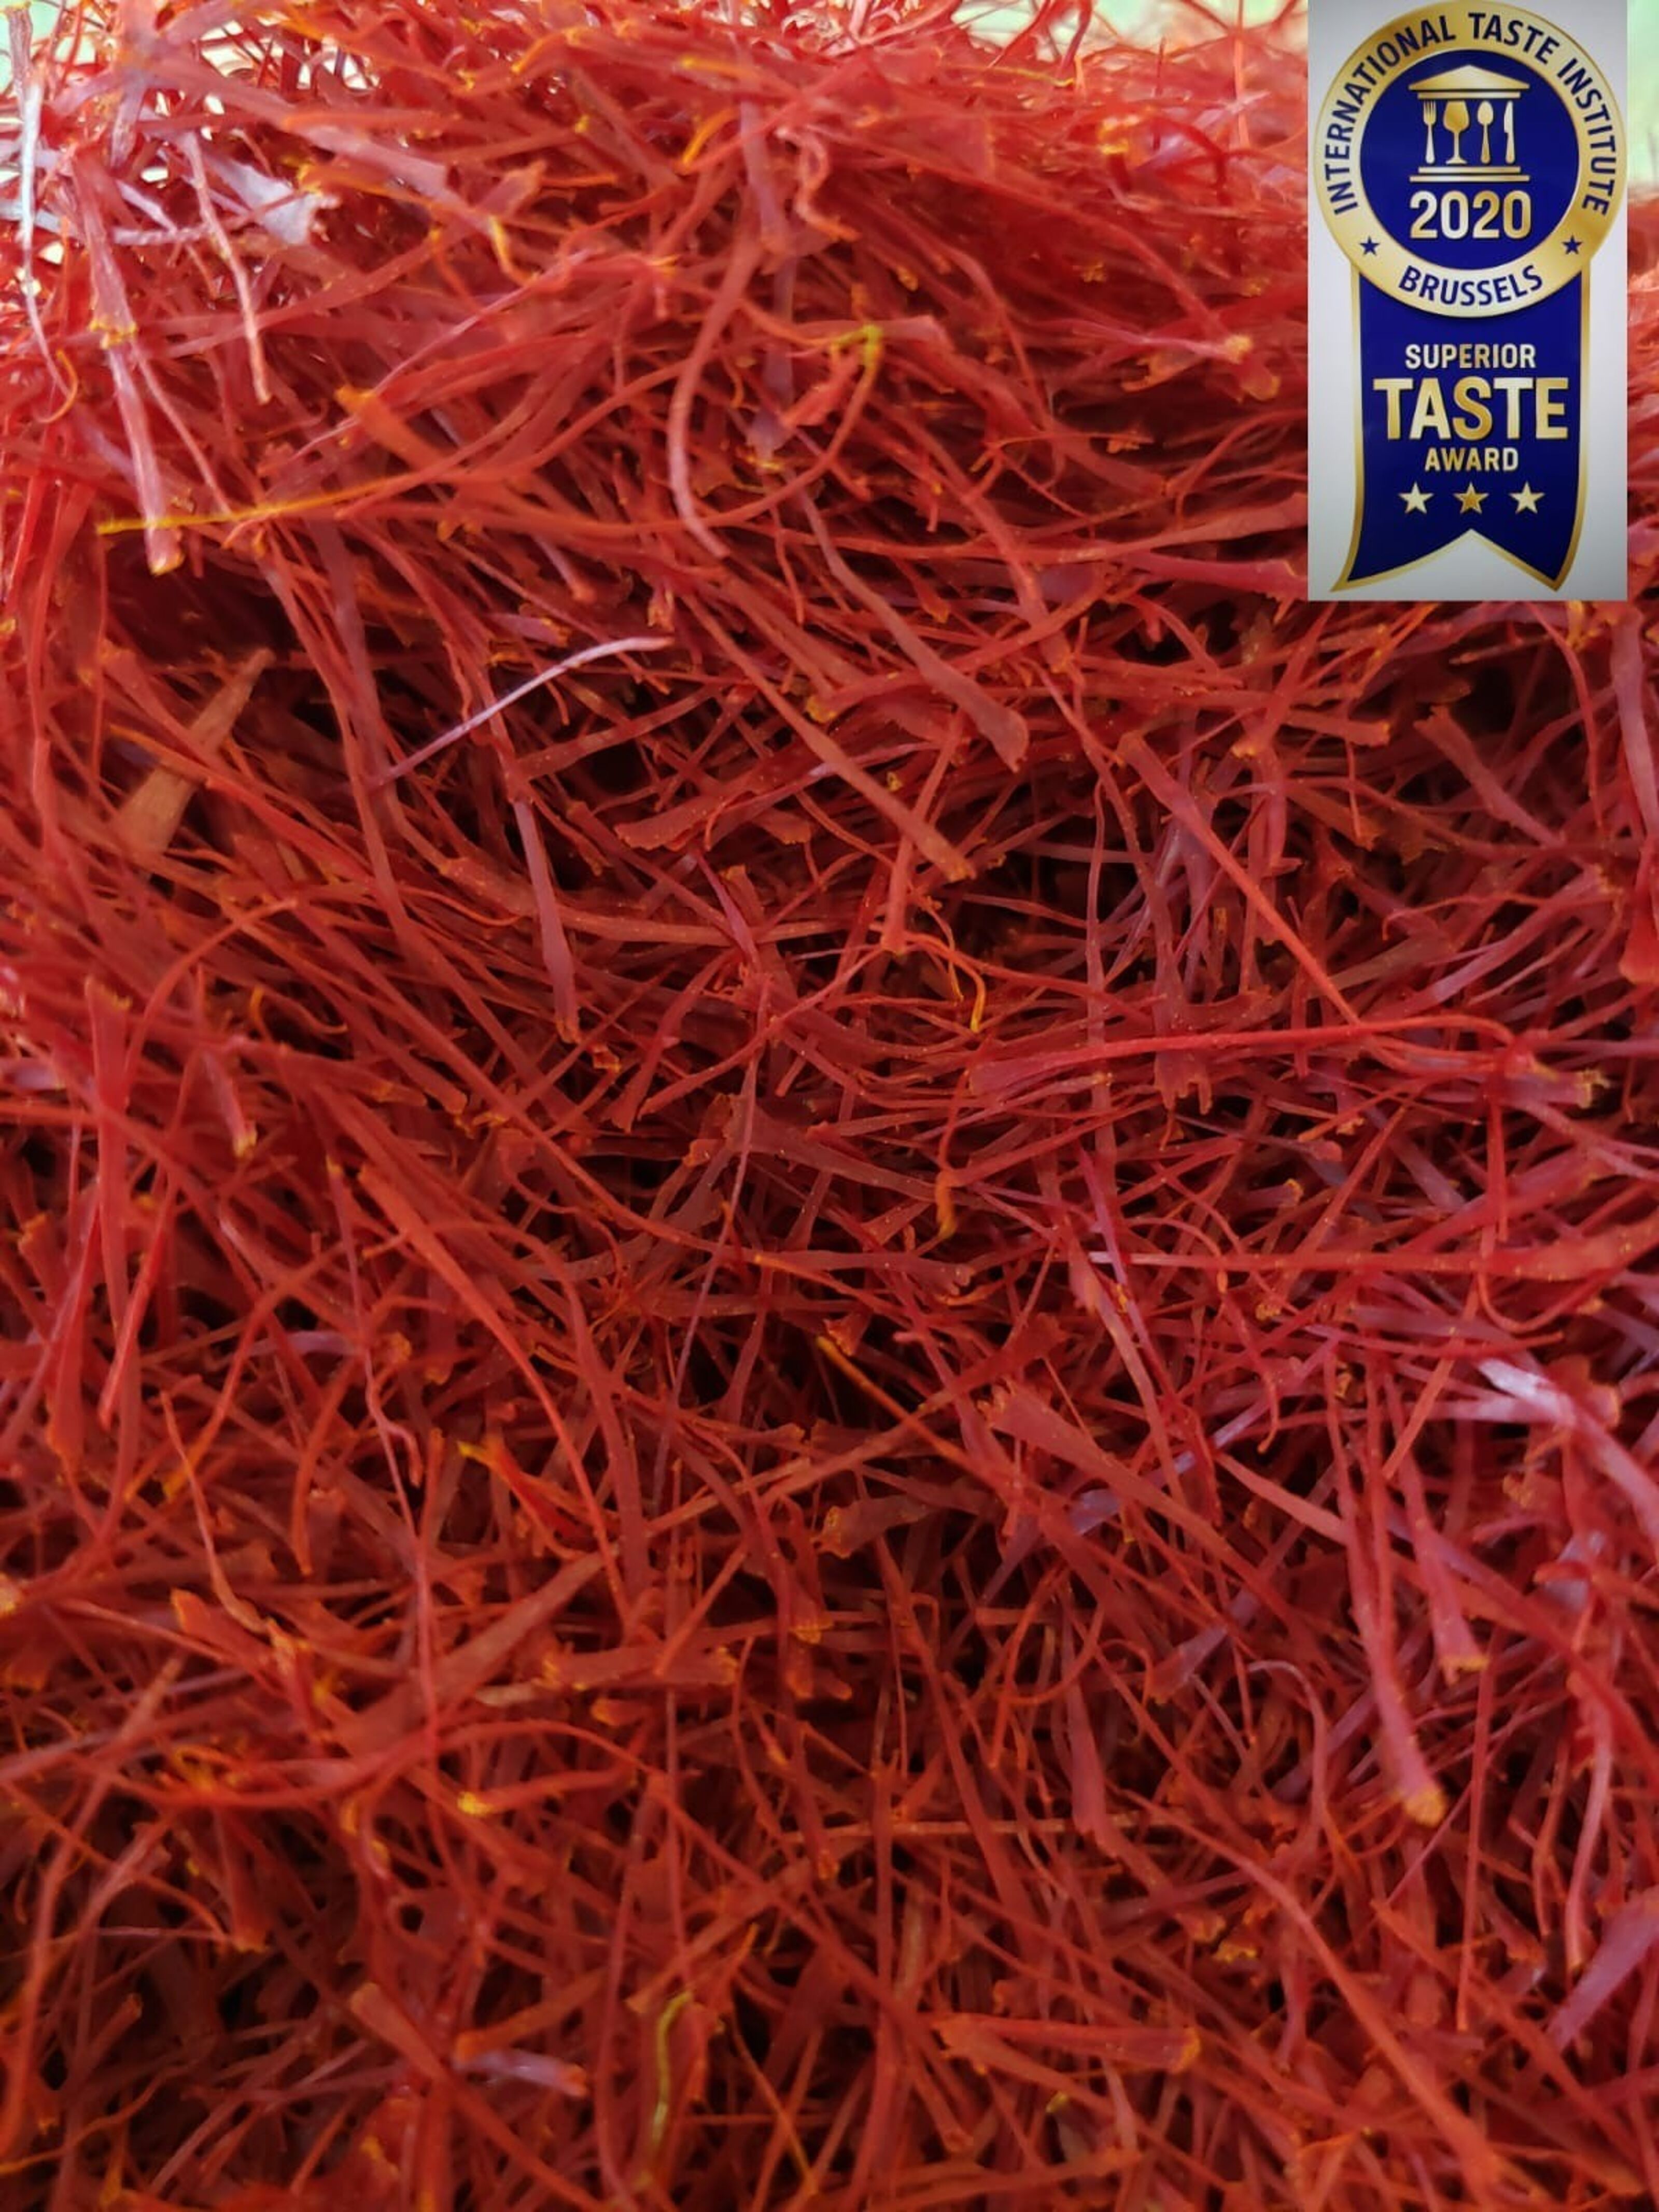 Buy wholesale Saffron Afghan THE BEST SAFRAN IN THE WORLD / RIGHT  filaments (stigmas) / category I (extra) / Grade A + / vacuum bag / 100  grams